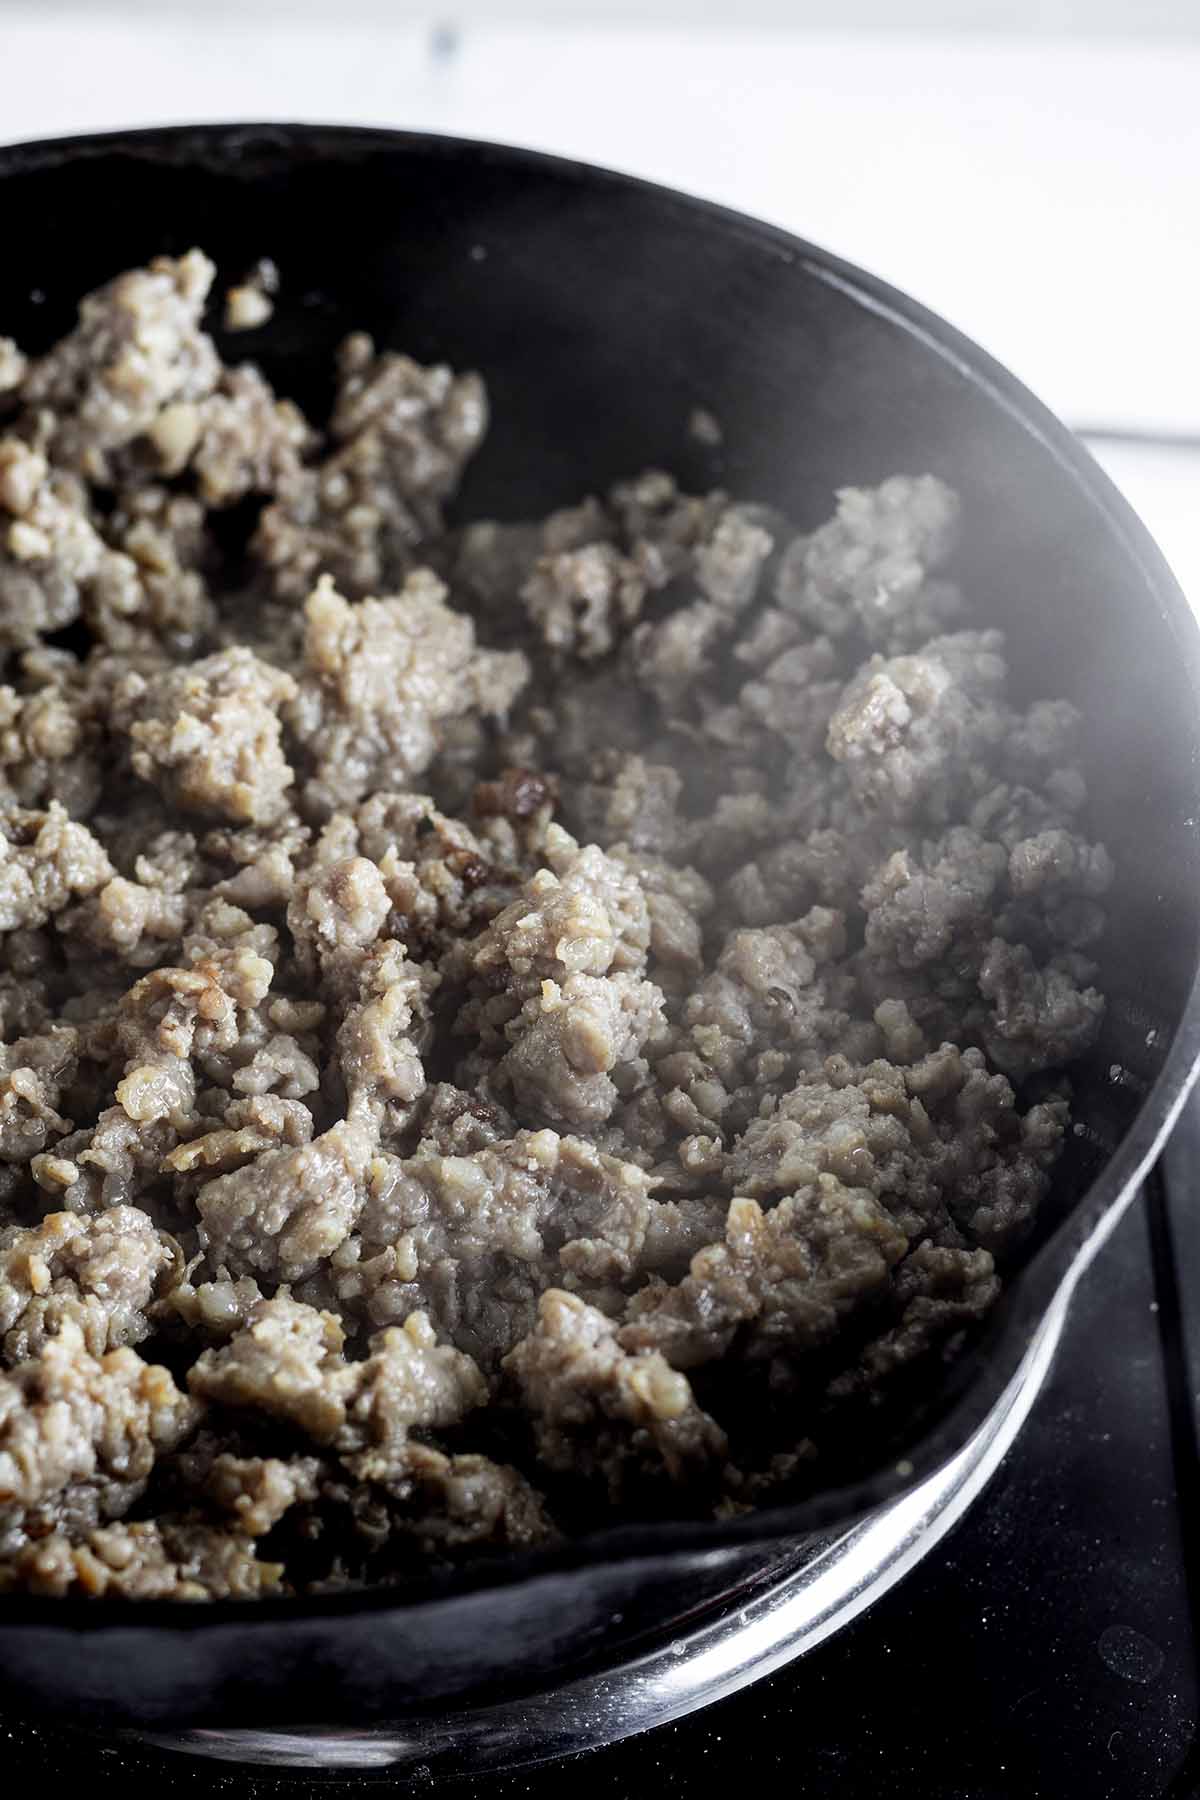 Breakfast sausage cooking in a skillet